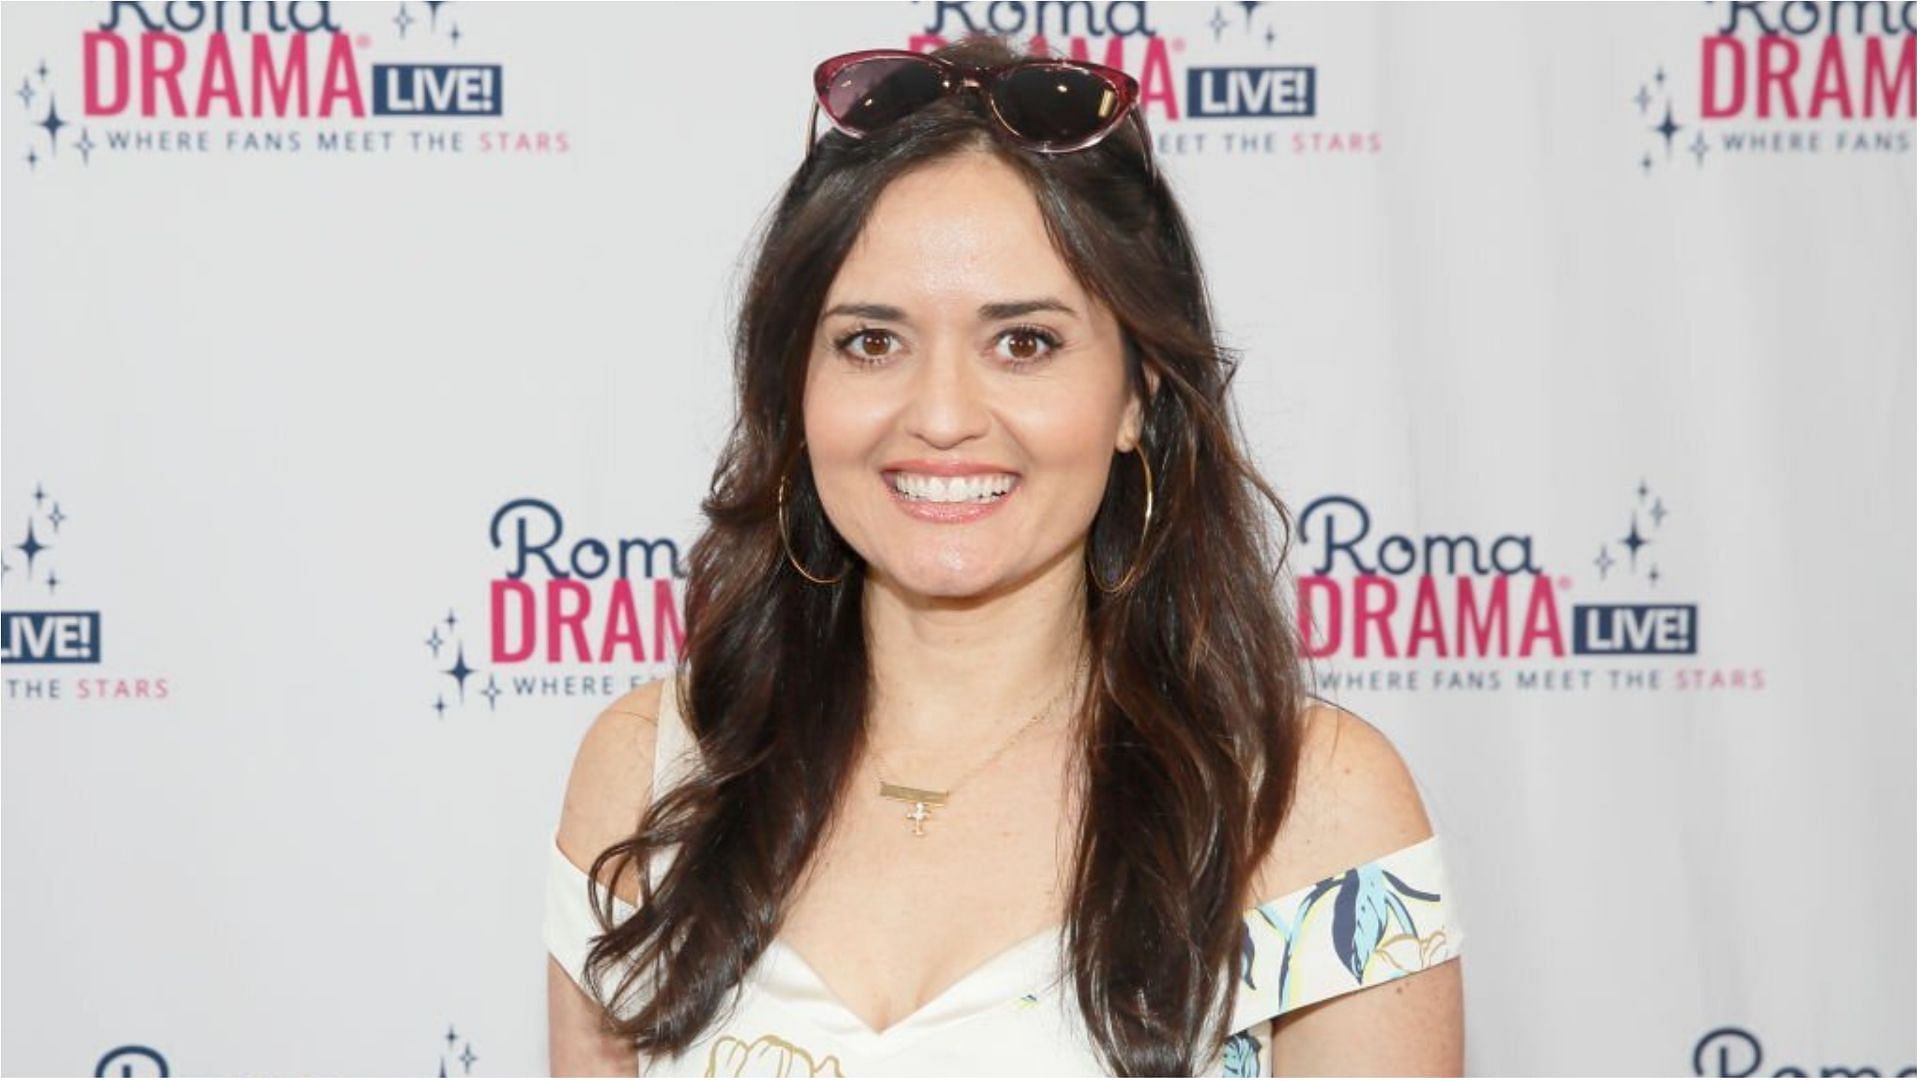 Danica McKellar has shifted to rural Tennessee with her family (Image via Mireya Acierto/Getty Images)